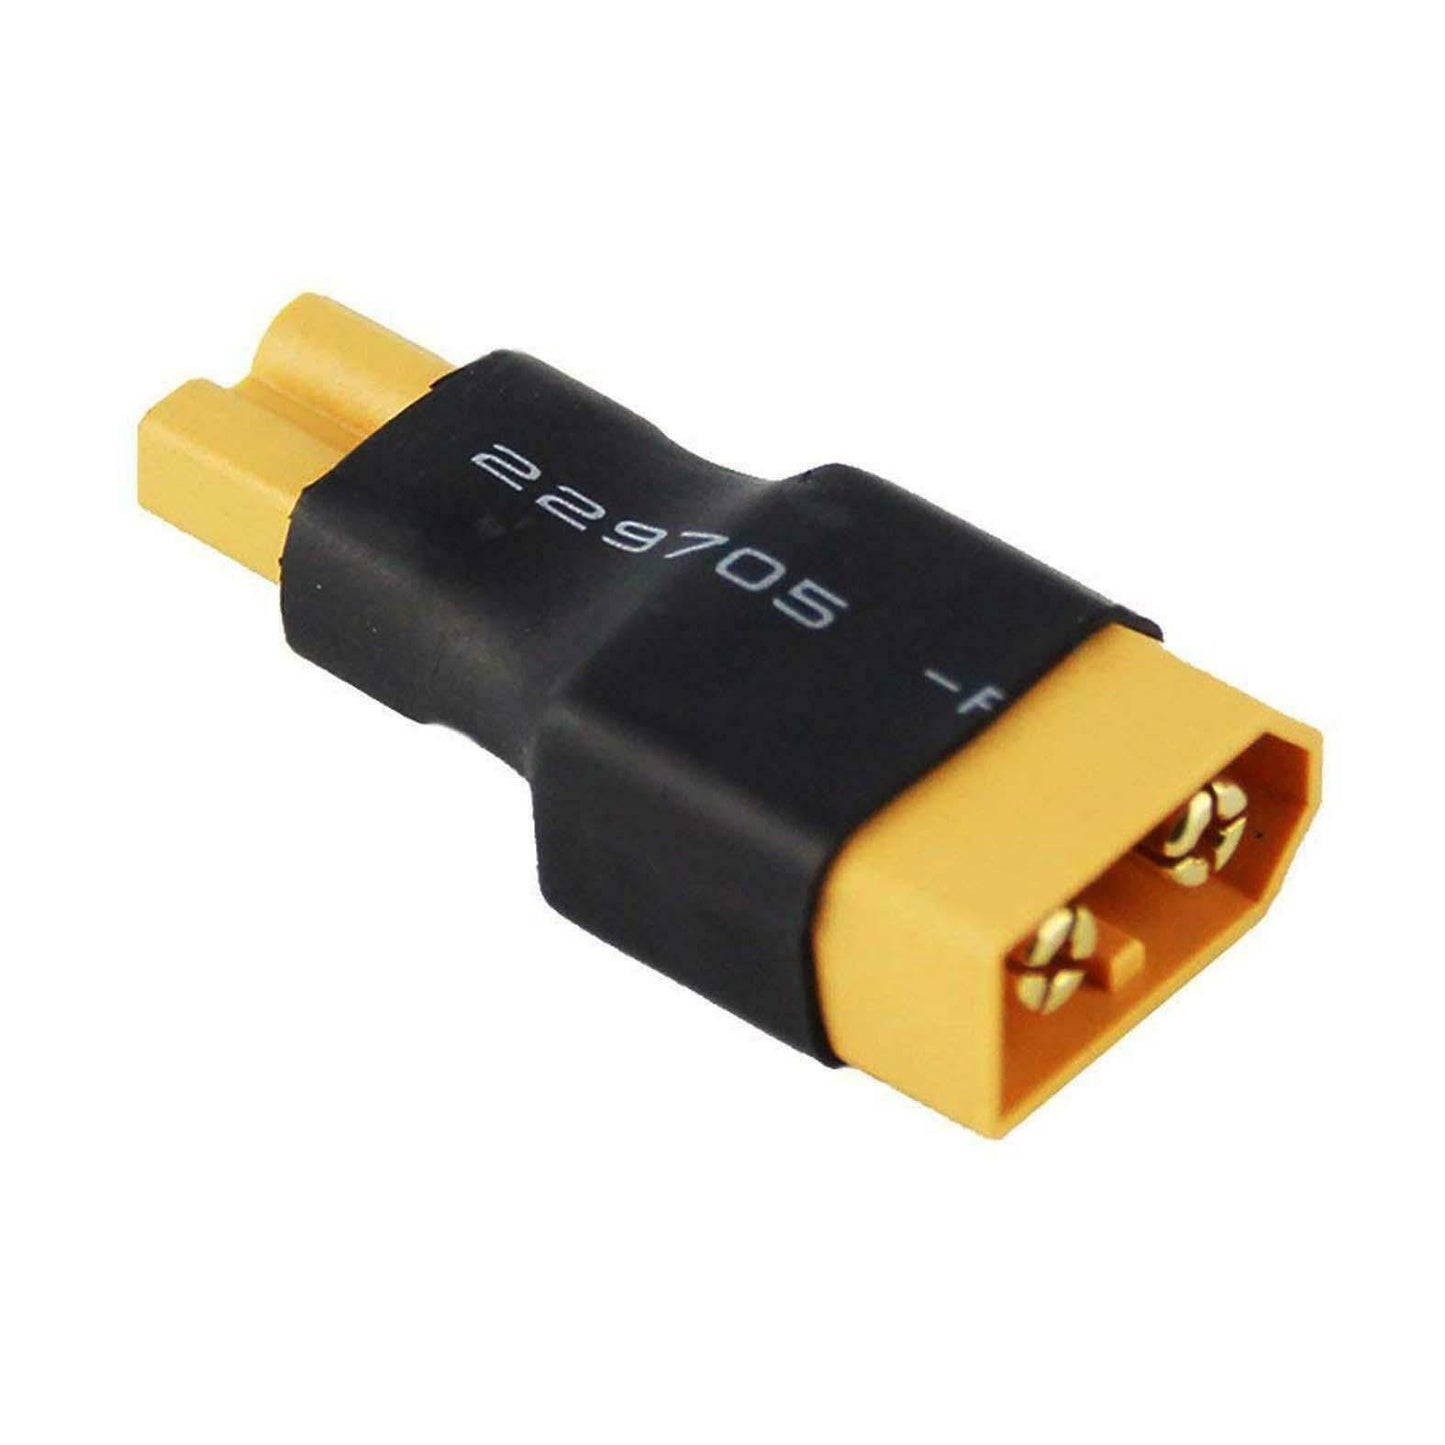 XT30 to XT60 Male/Female Female/Male Adapter Connector